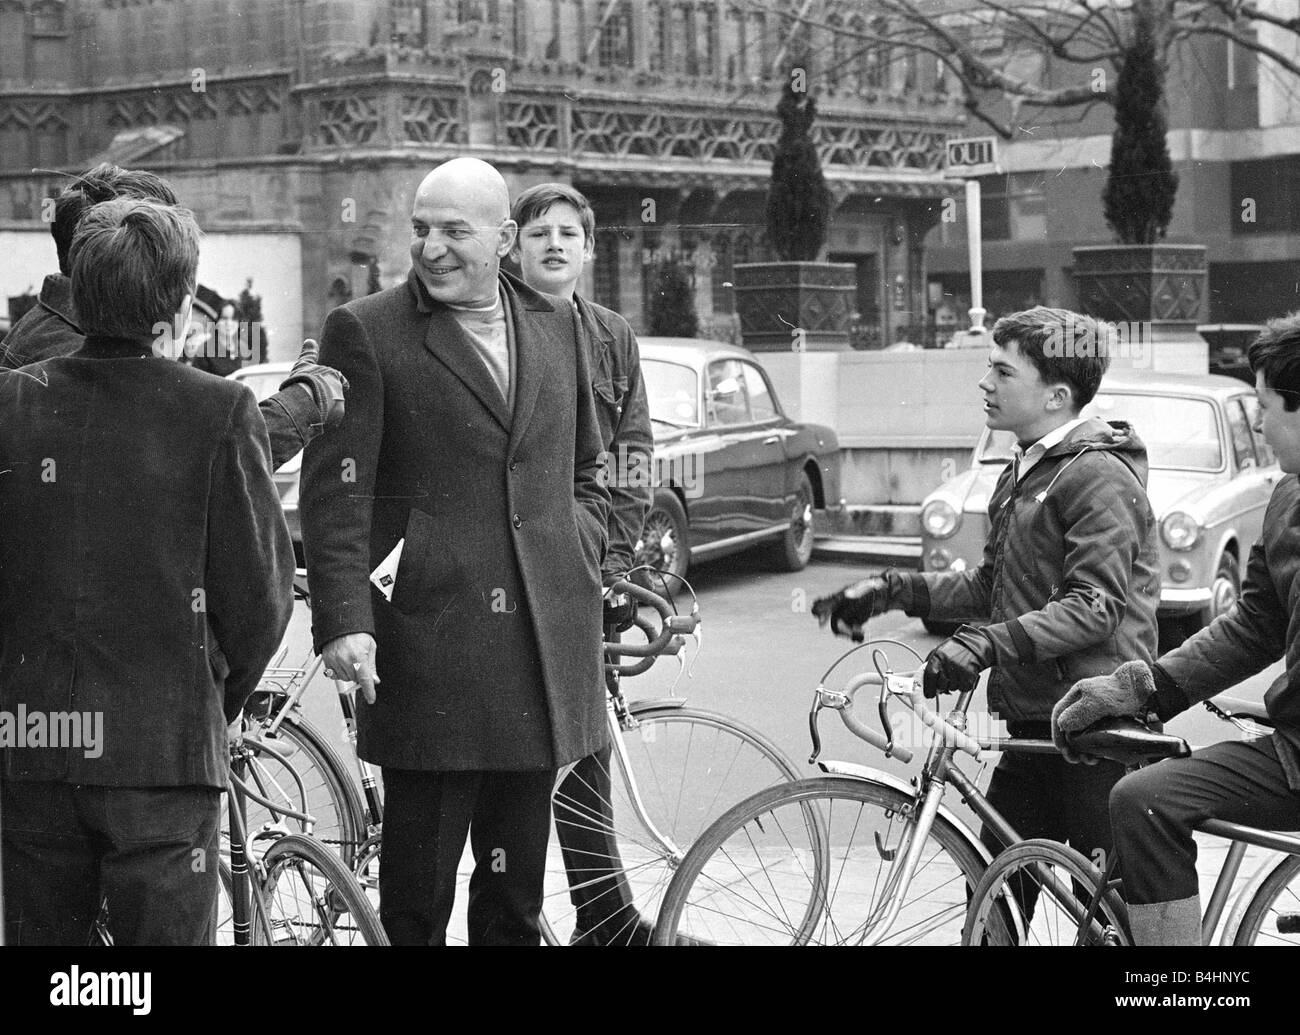 Actor Telly Savalas surrounded by young fans with bikes during a walk in London with his wife February 1968 1960s Mirrorpix Stock Photo